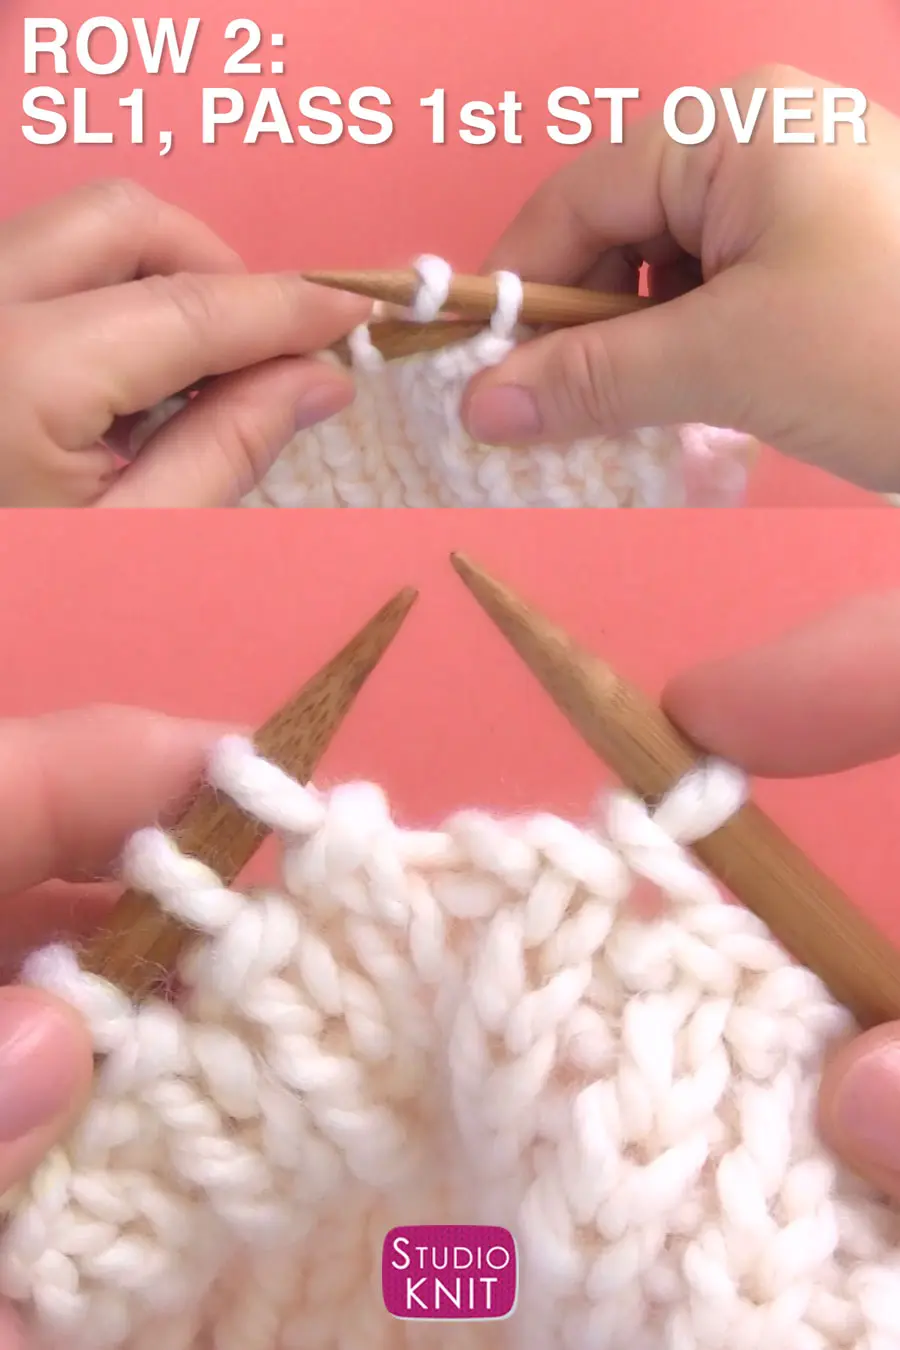 Knitting the second row of the Two-Row Bind Off Technique